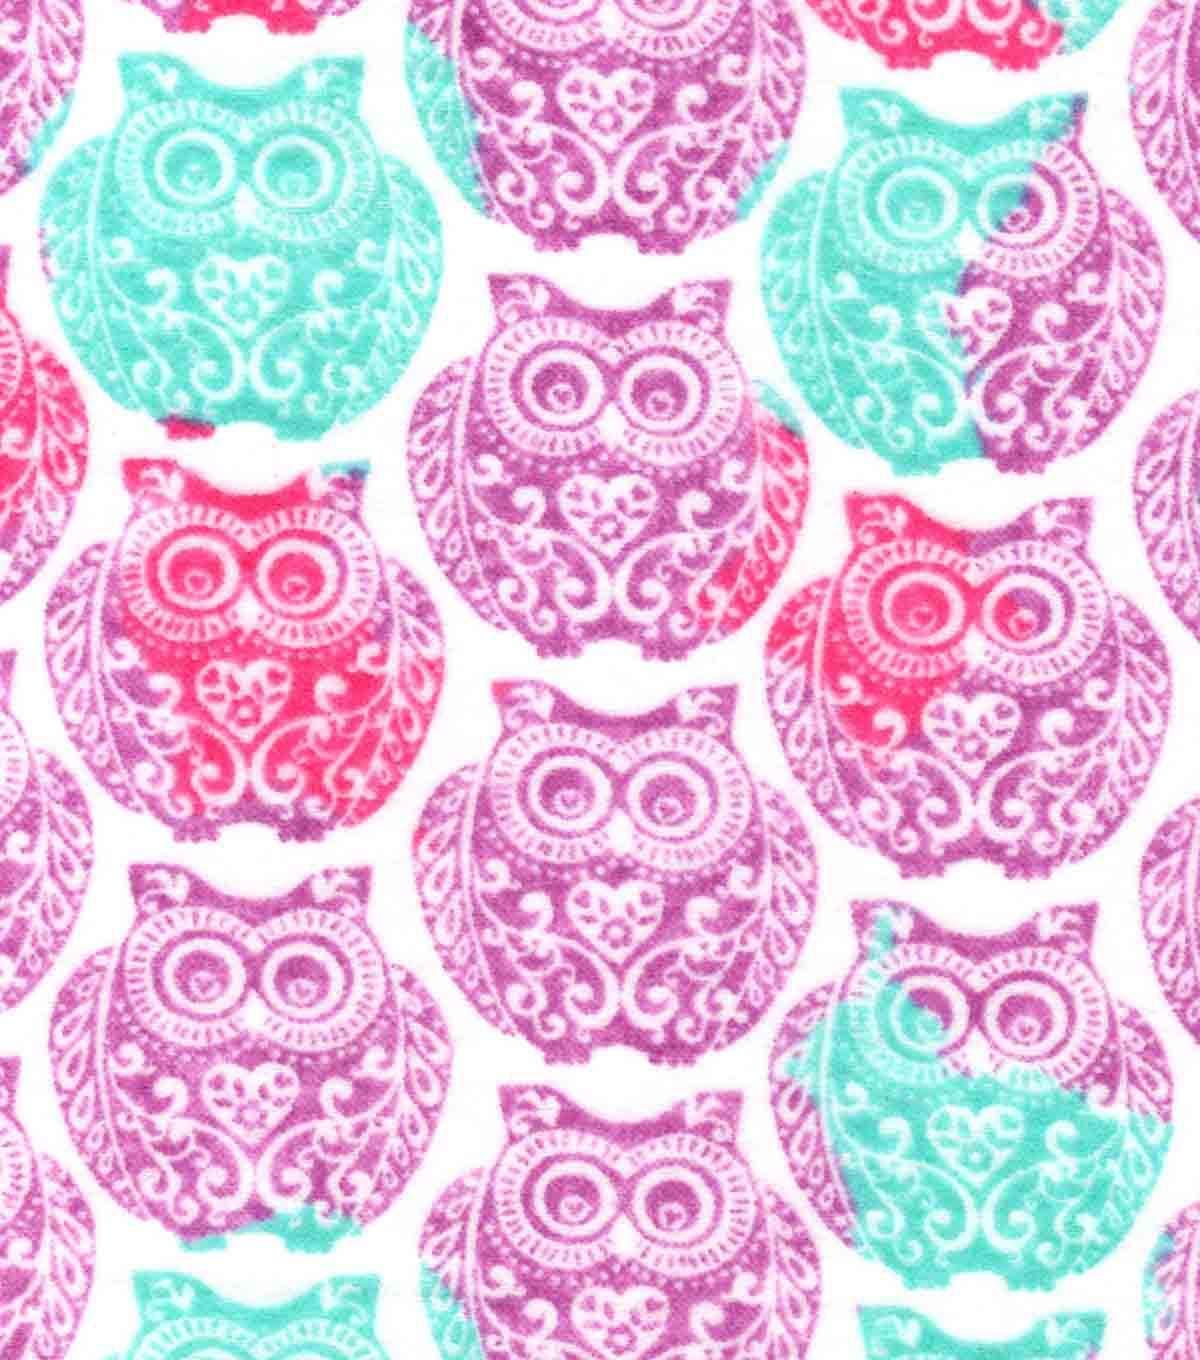 Snuggle Flannel Fabric -Tribal Owl Stamp -   24 fabric owl crafts
 ideas